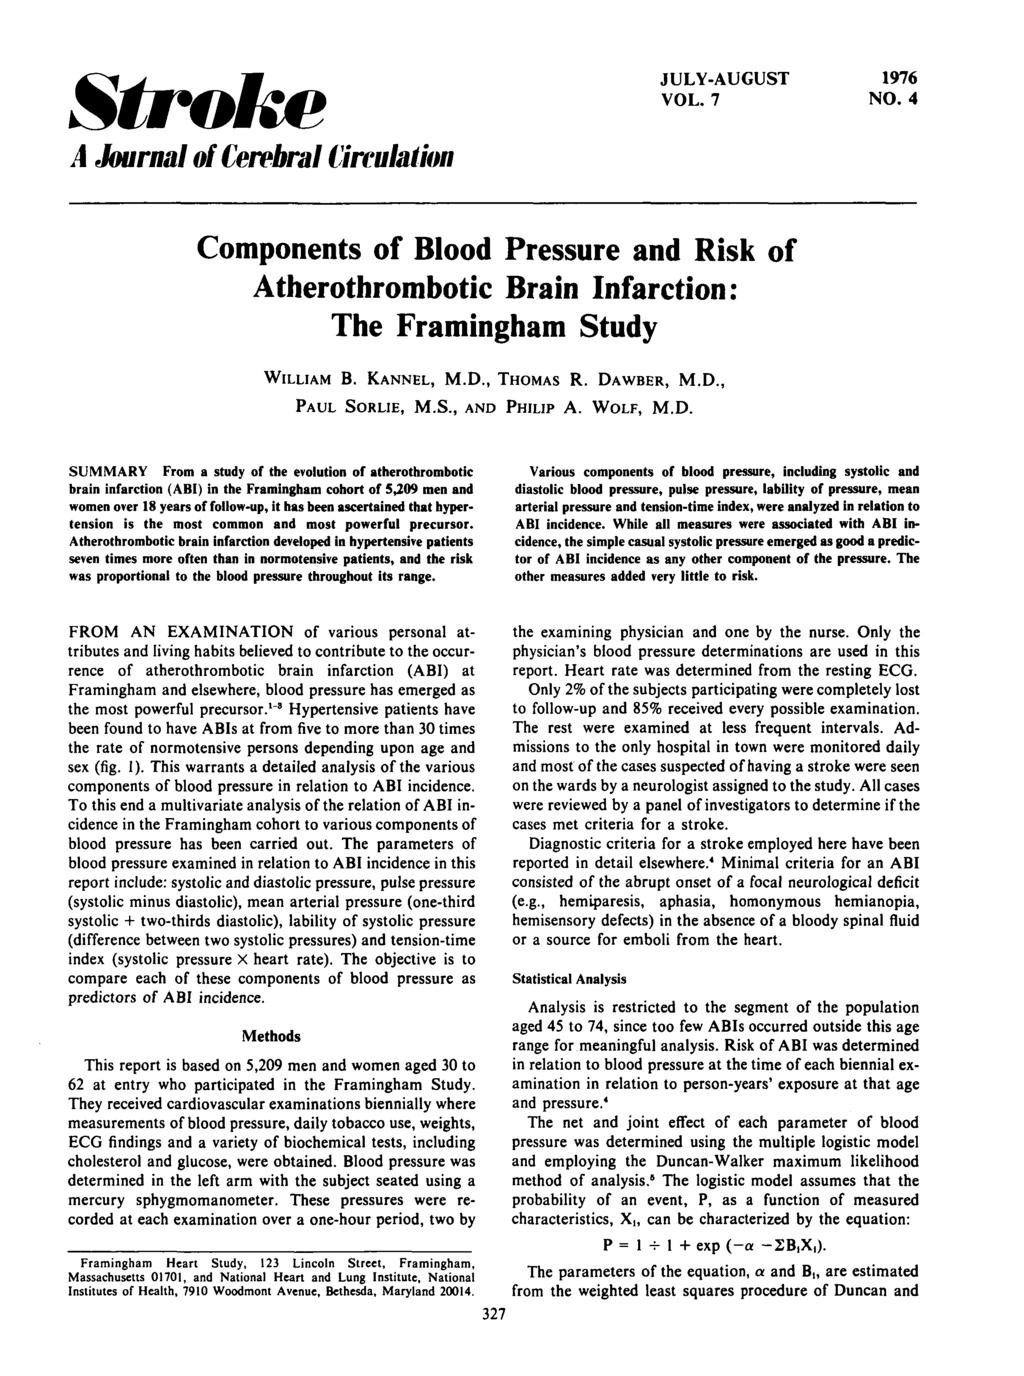 Stroke A Journal of Cerebral Circulation JULY-AUGUST VOL. 7 1976 NO. 4 Components of Blood Pressure and Risk of Atherothrombotic Brain Infarction: The Framingham Study WILLIAM B. KANNEL, M.D.